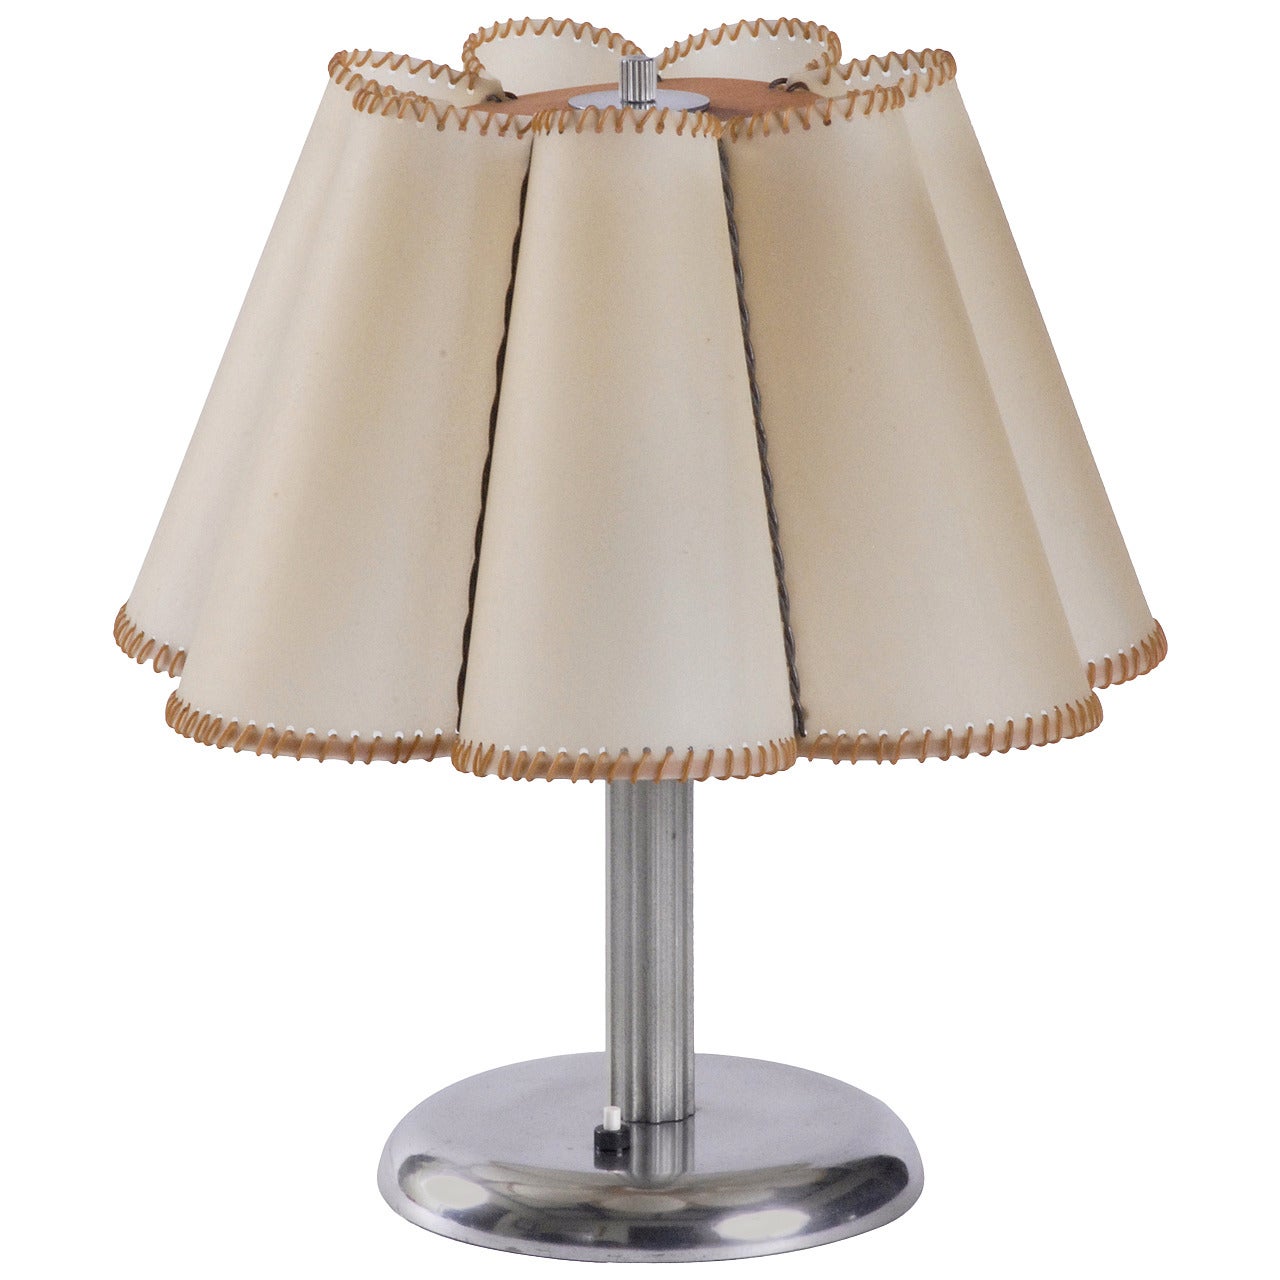 German Table Lamp in Polished Aluminium with Lucite Shade, 1940s